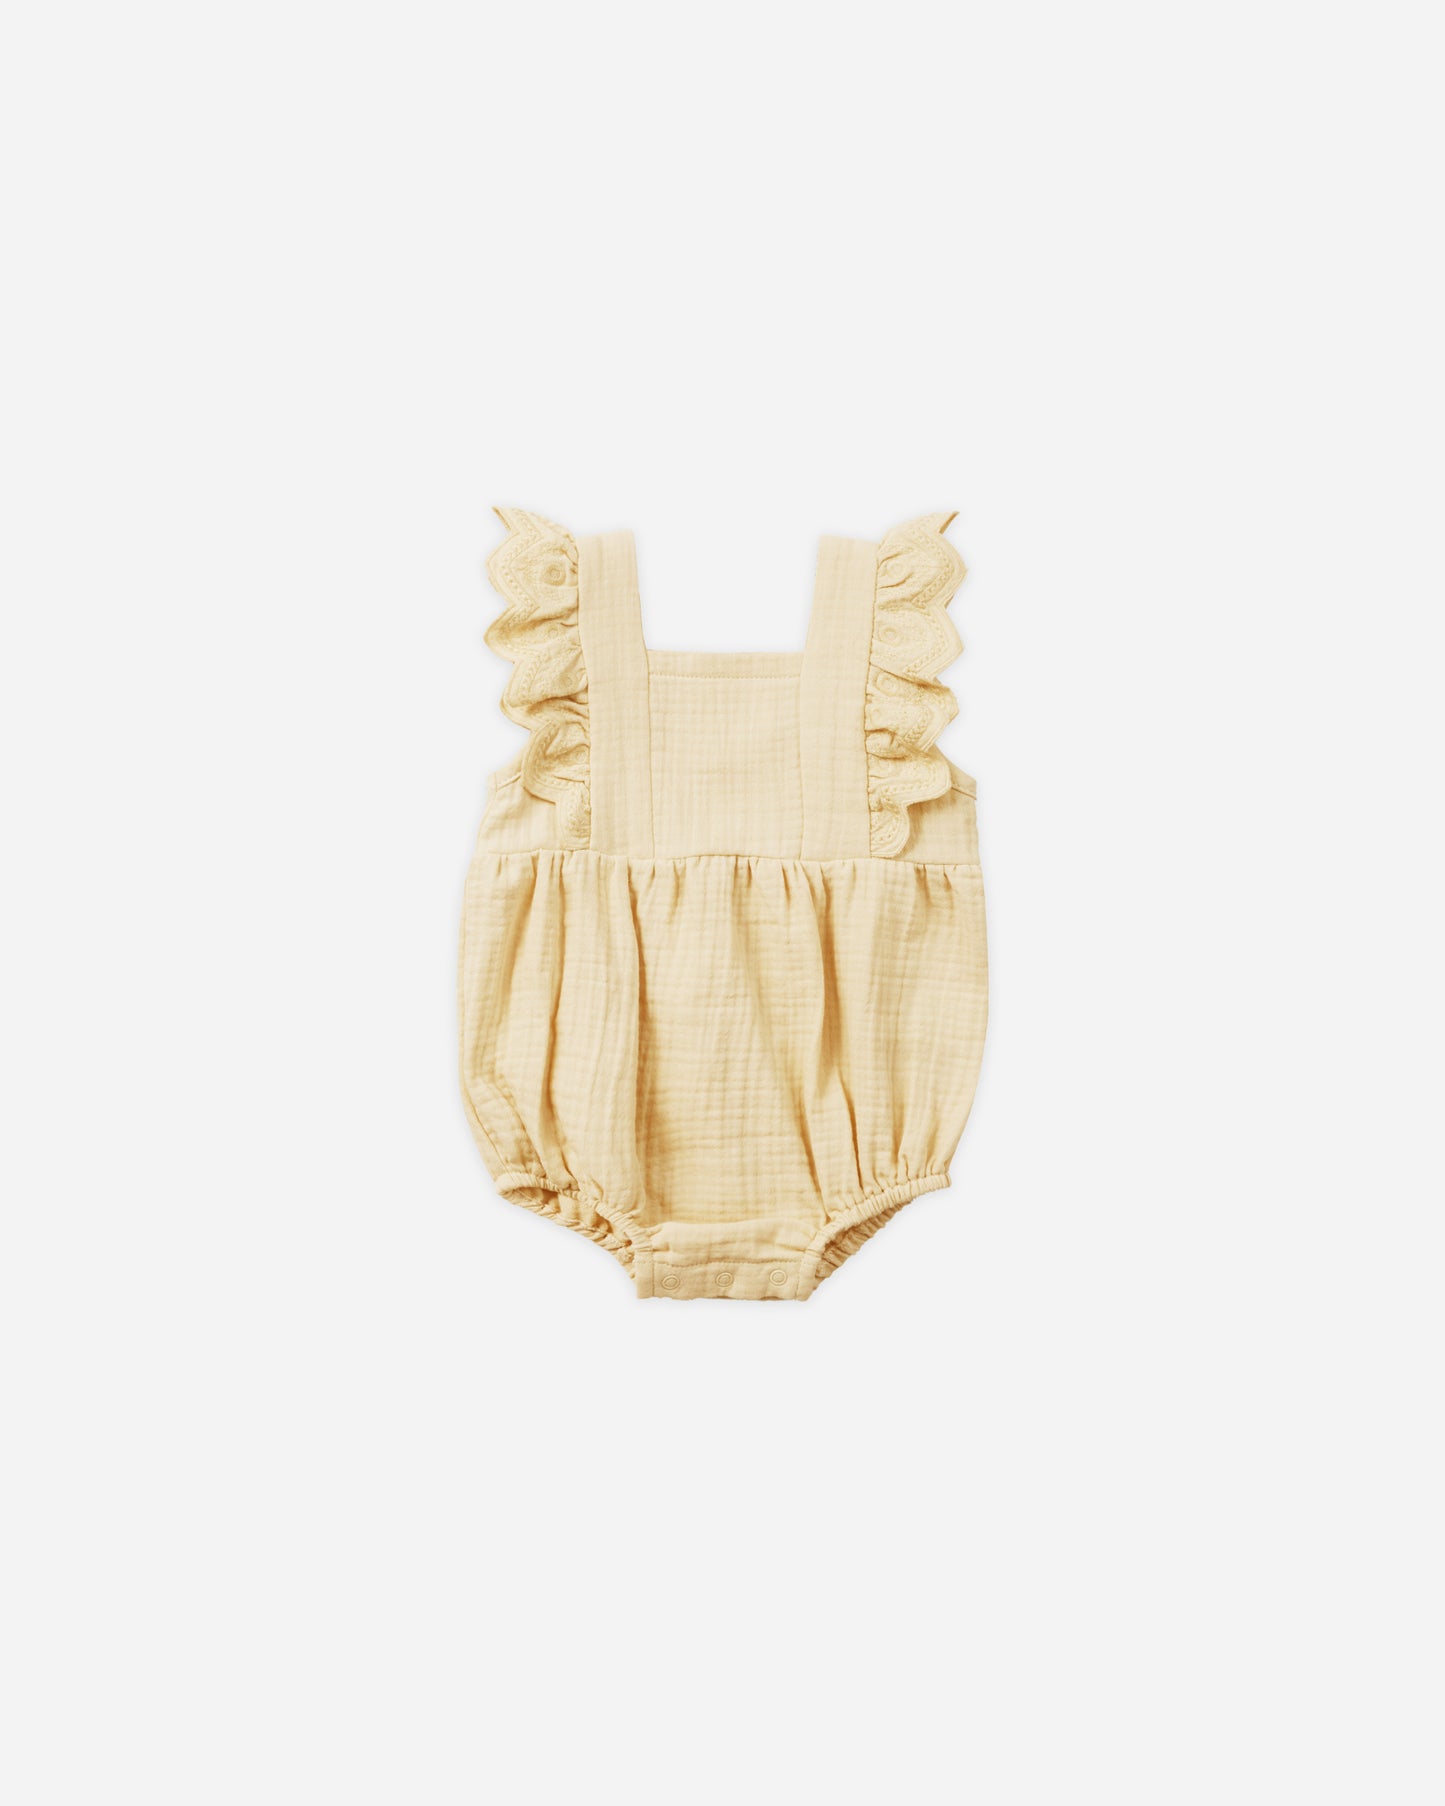 Naomi Romper || Lemon - Rylee + Cru | Kids Clothes | Trendy Baby Clothes | Modern Infant Outfits |